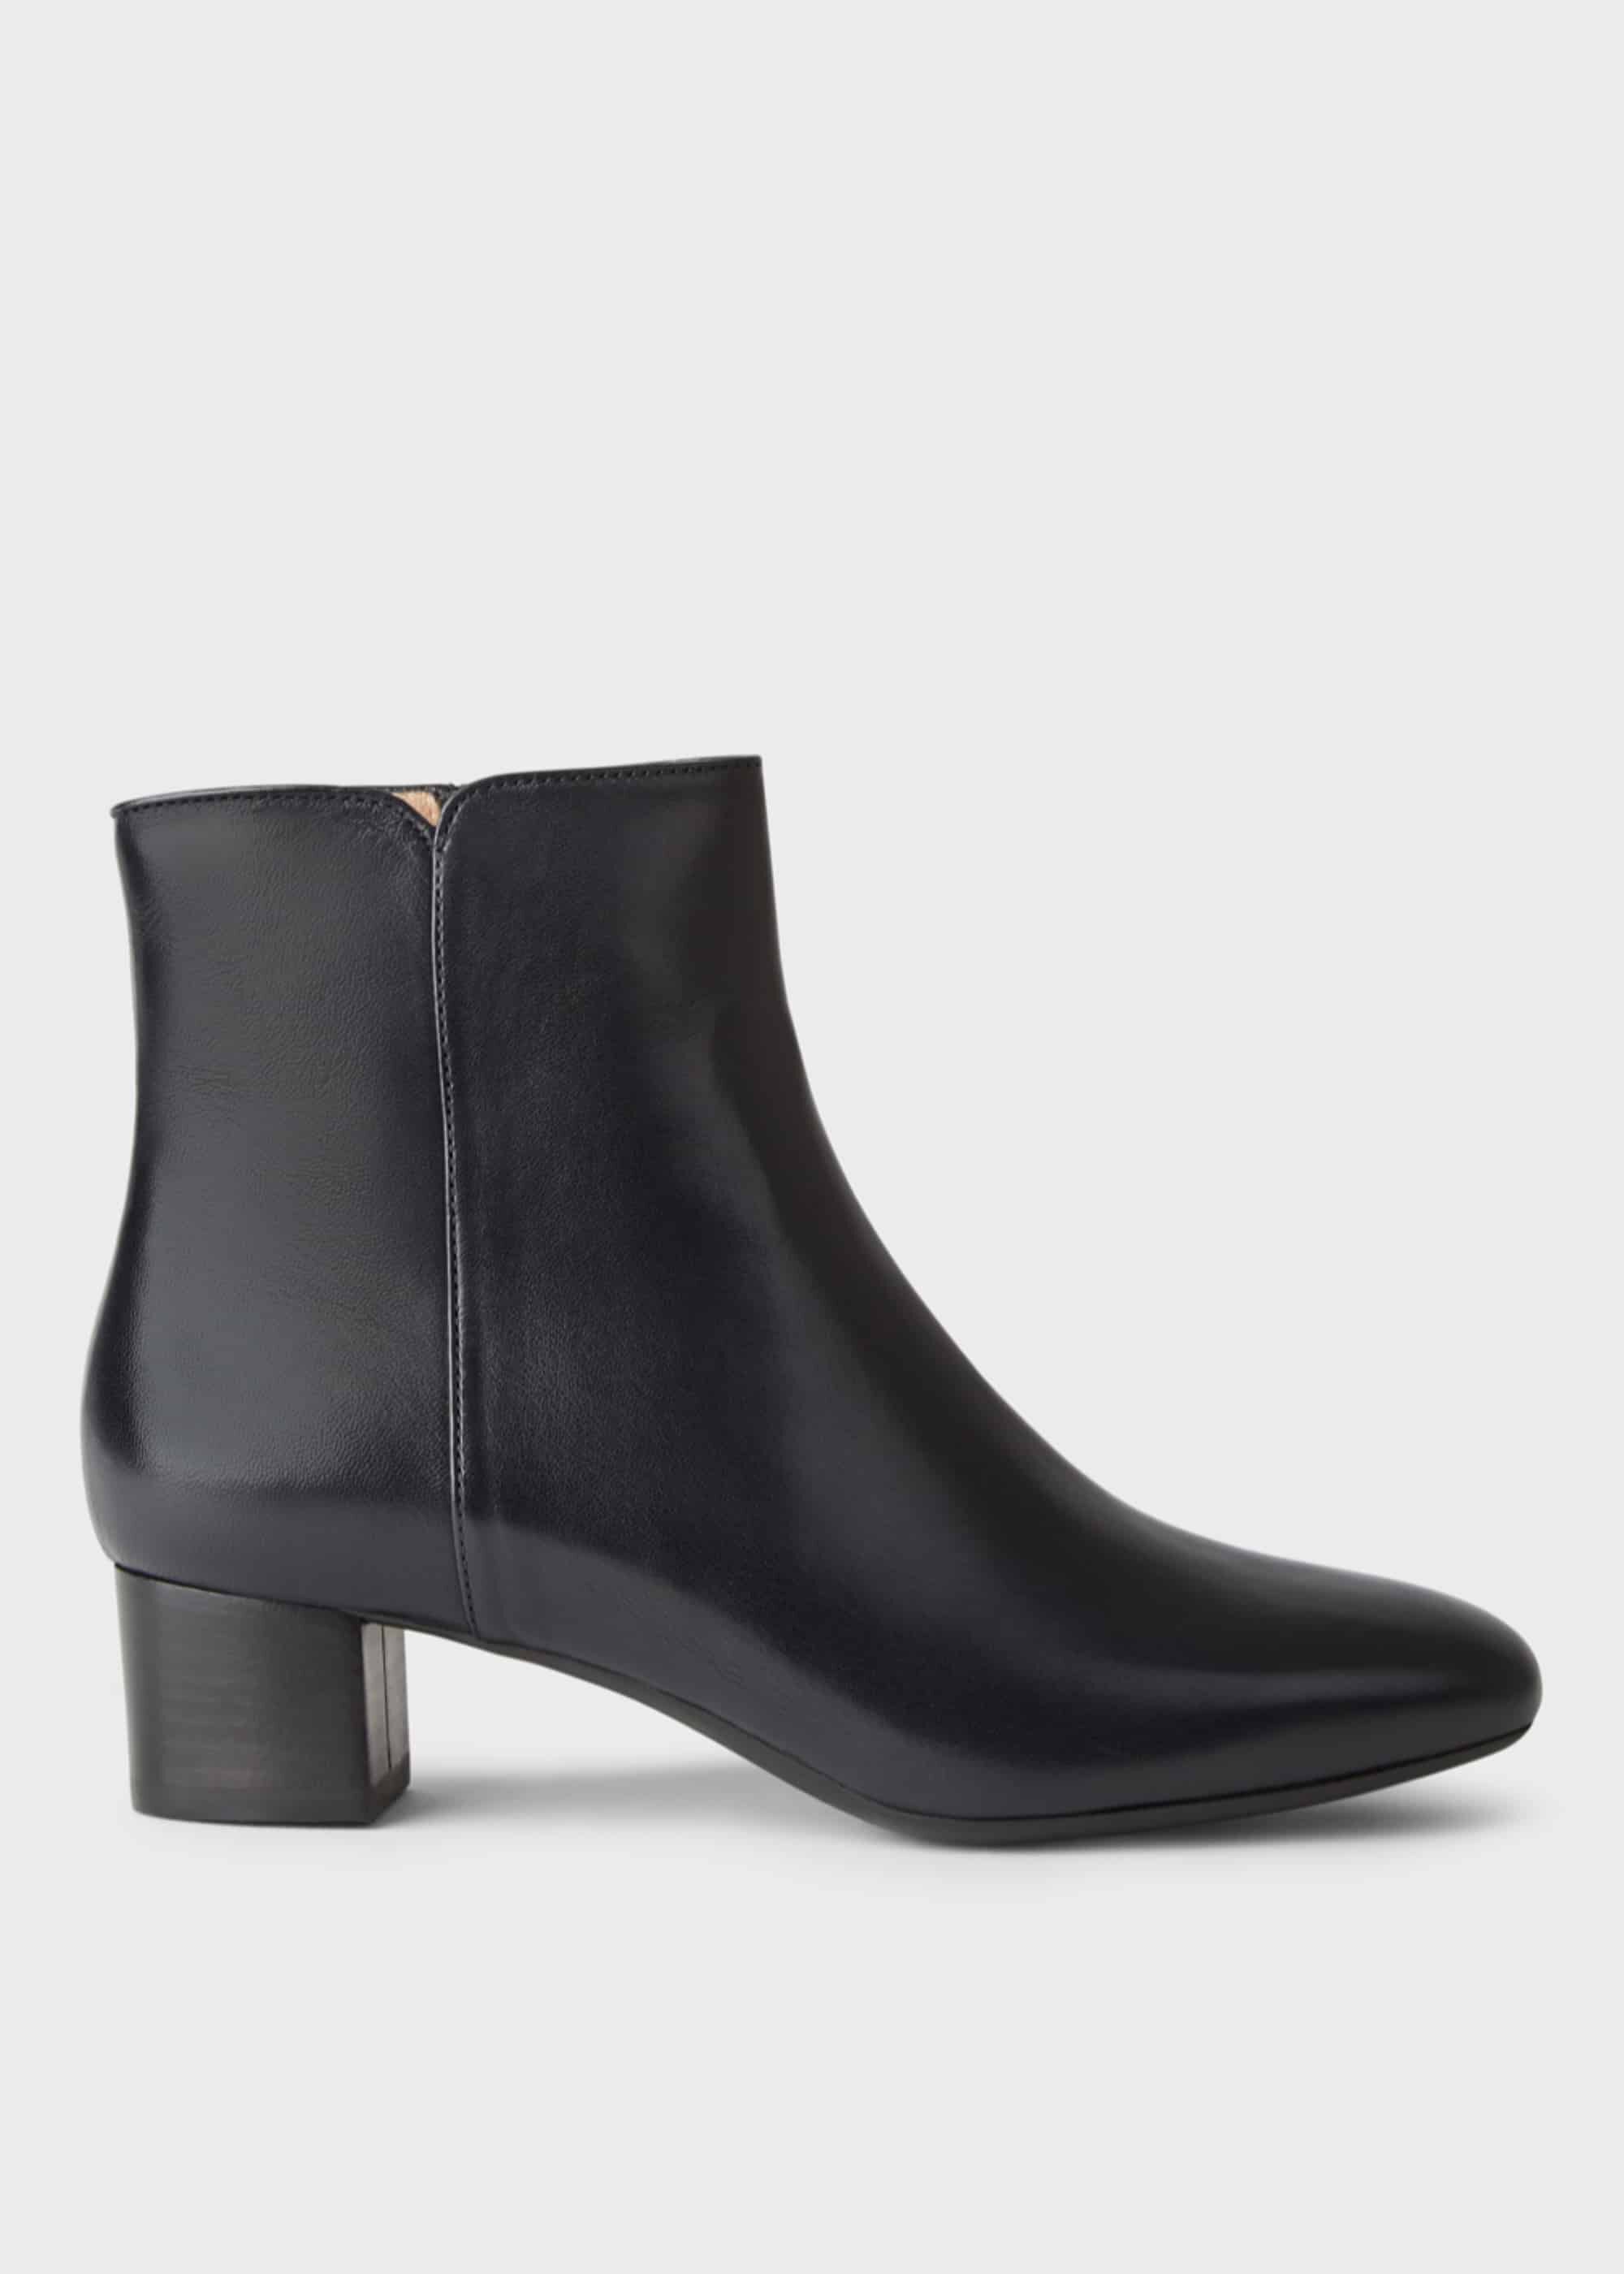 hobbs navy ankle boots